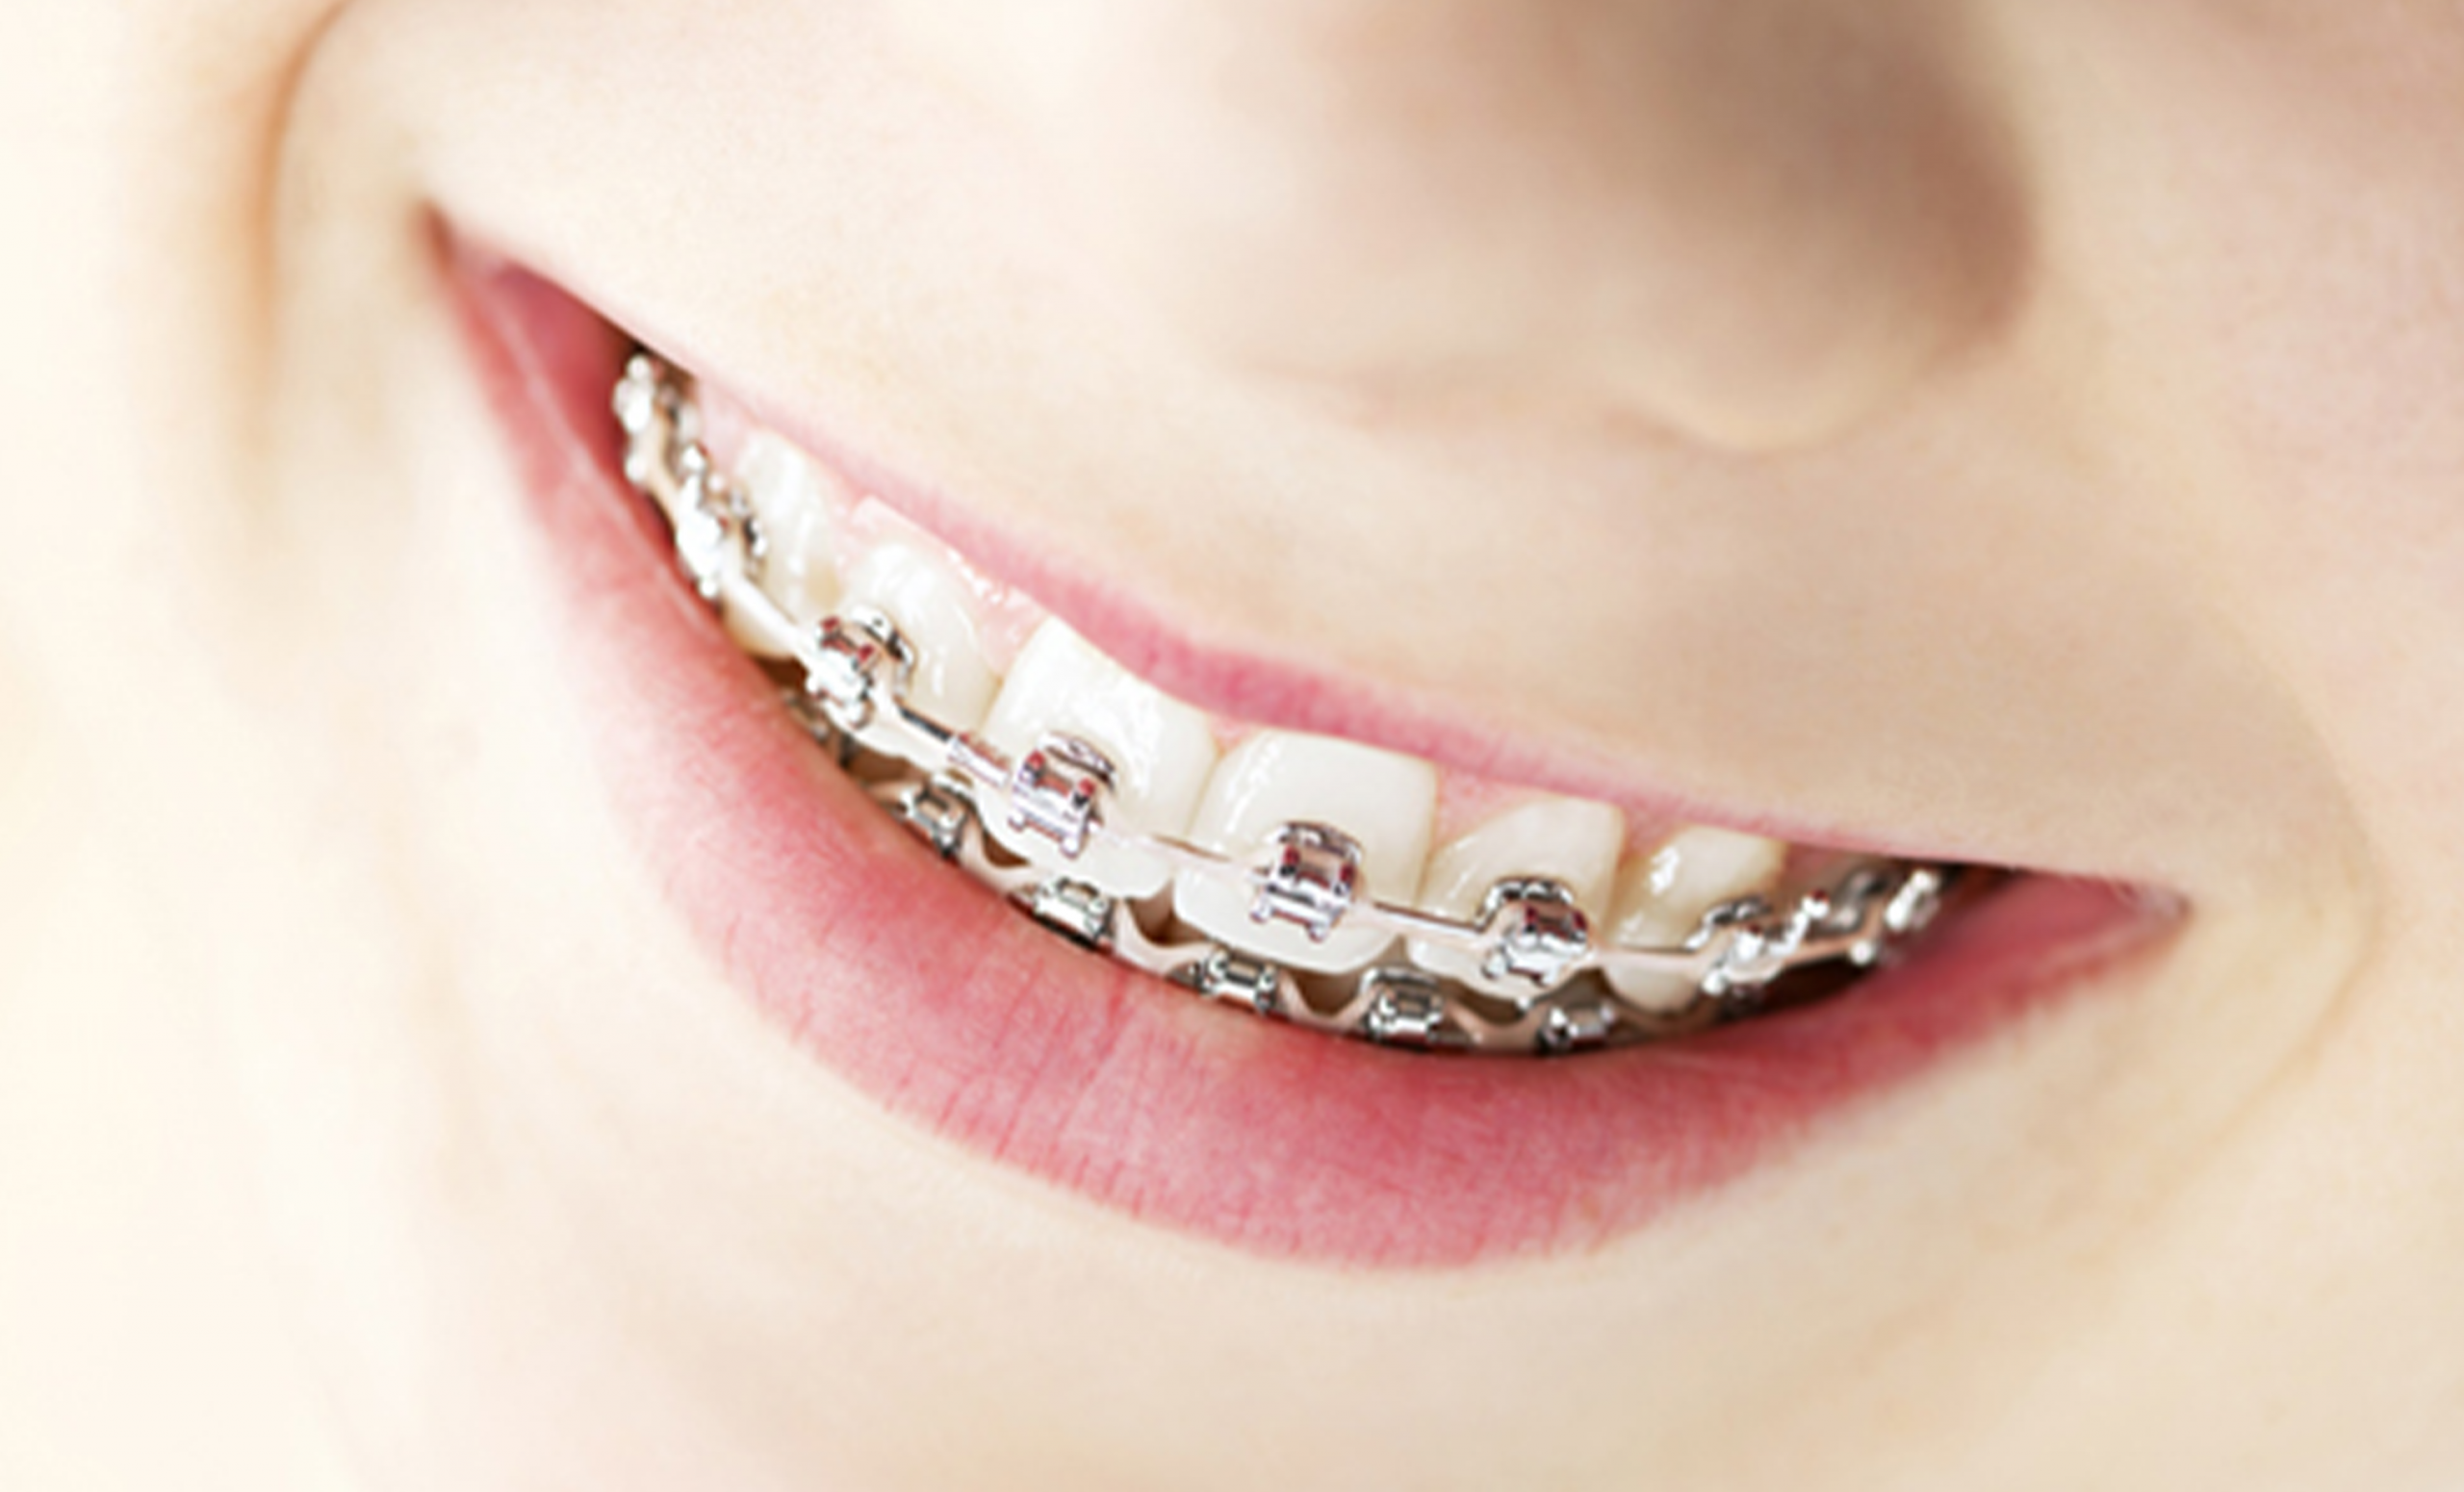 Besides straight teeth, what are the benefits of braces?